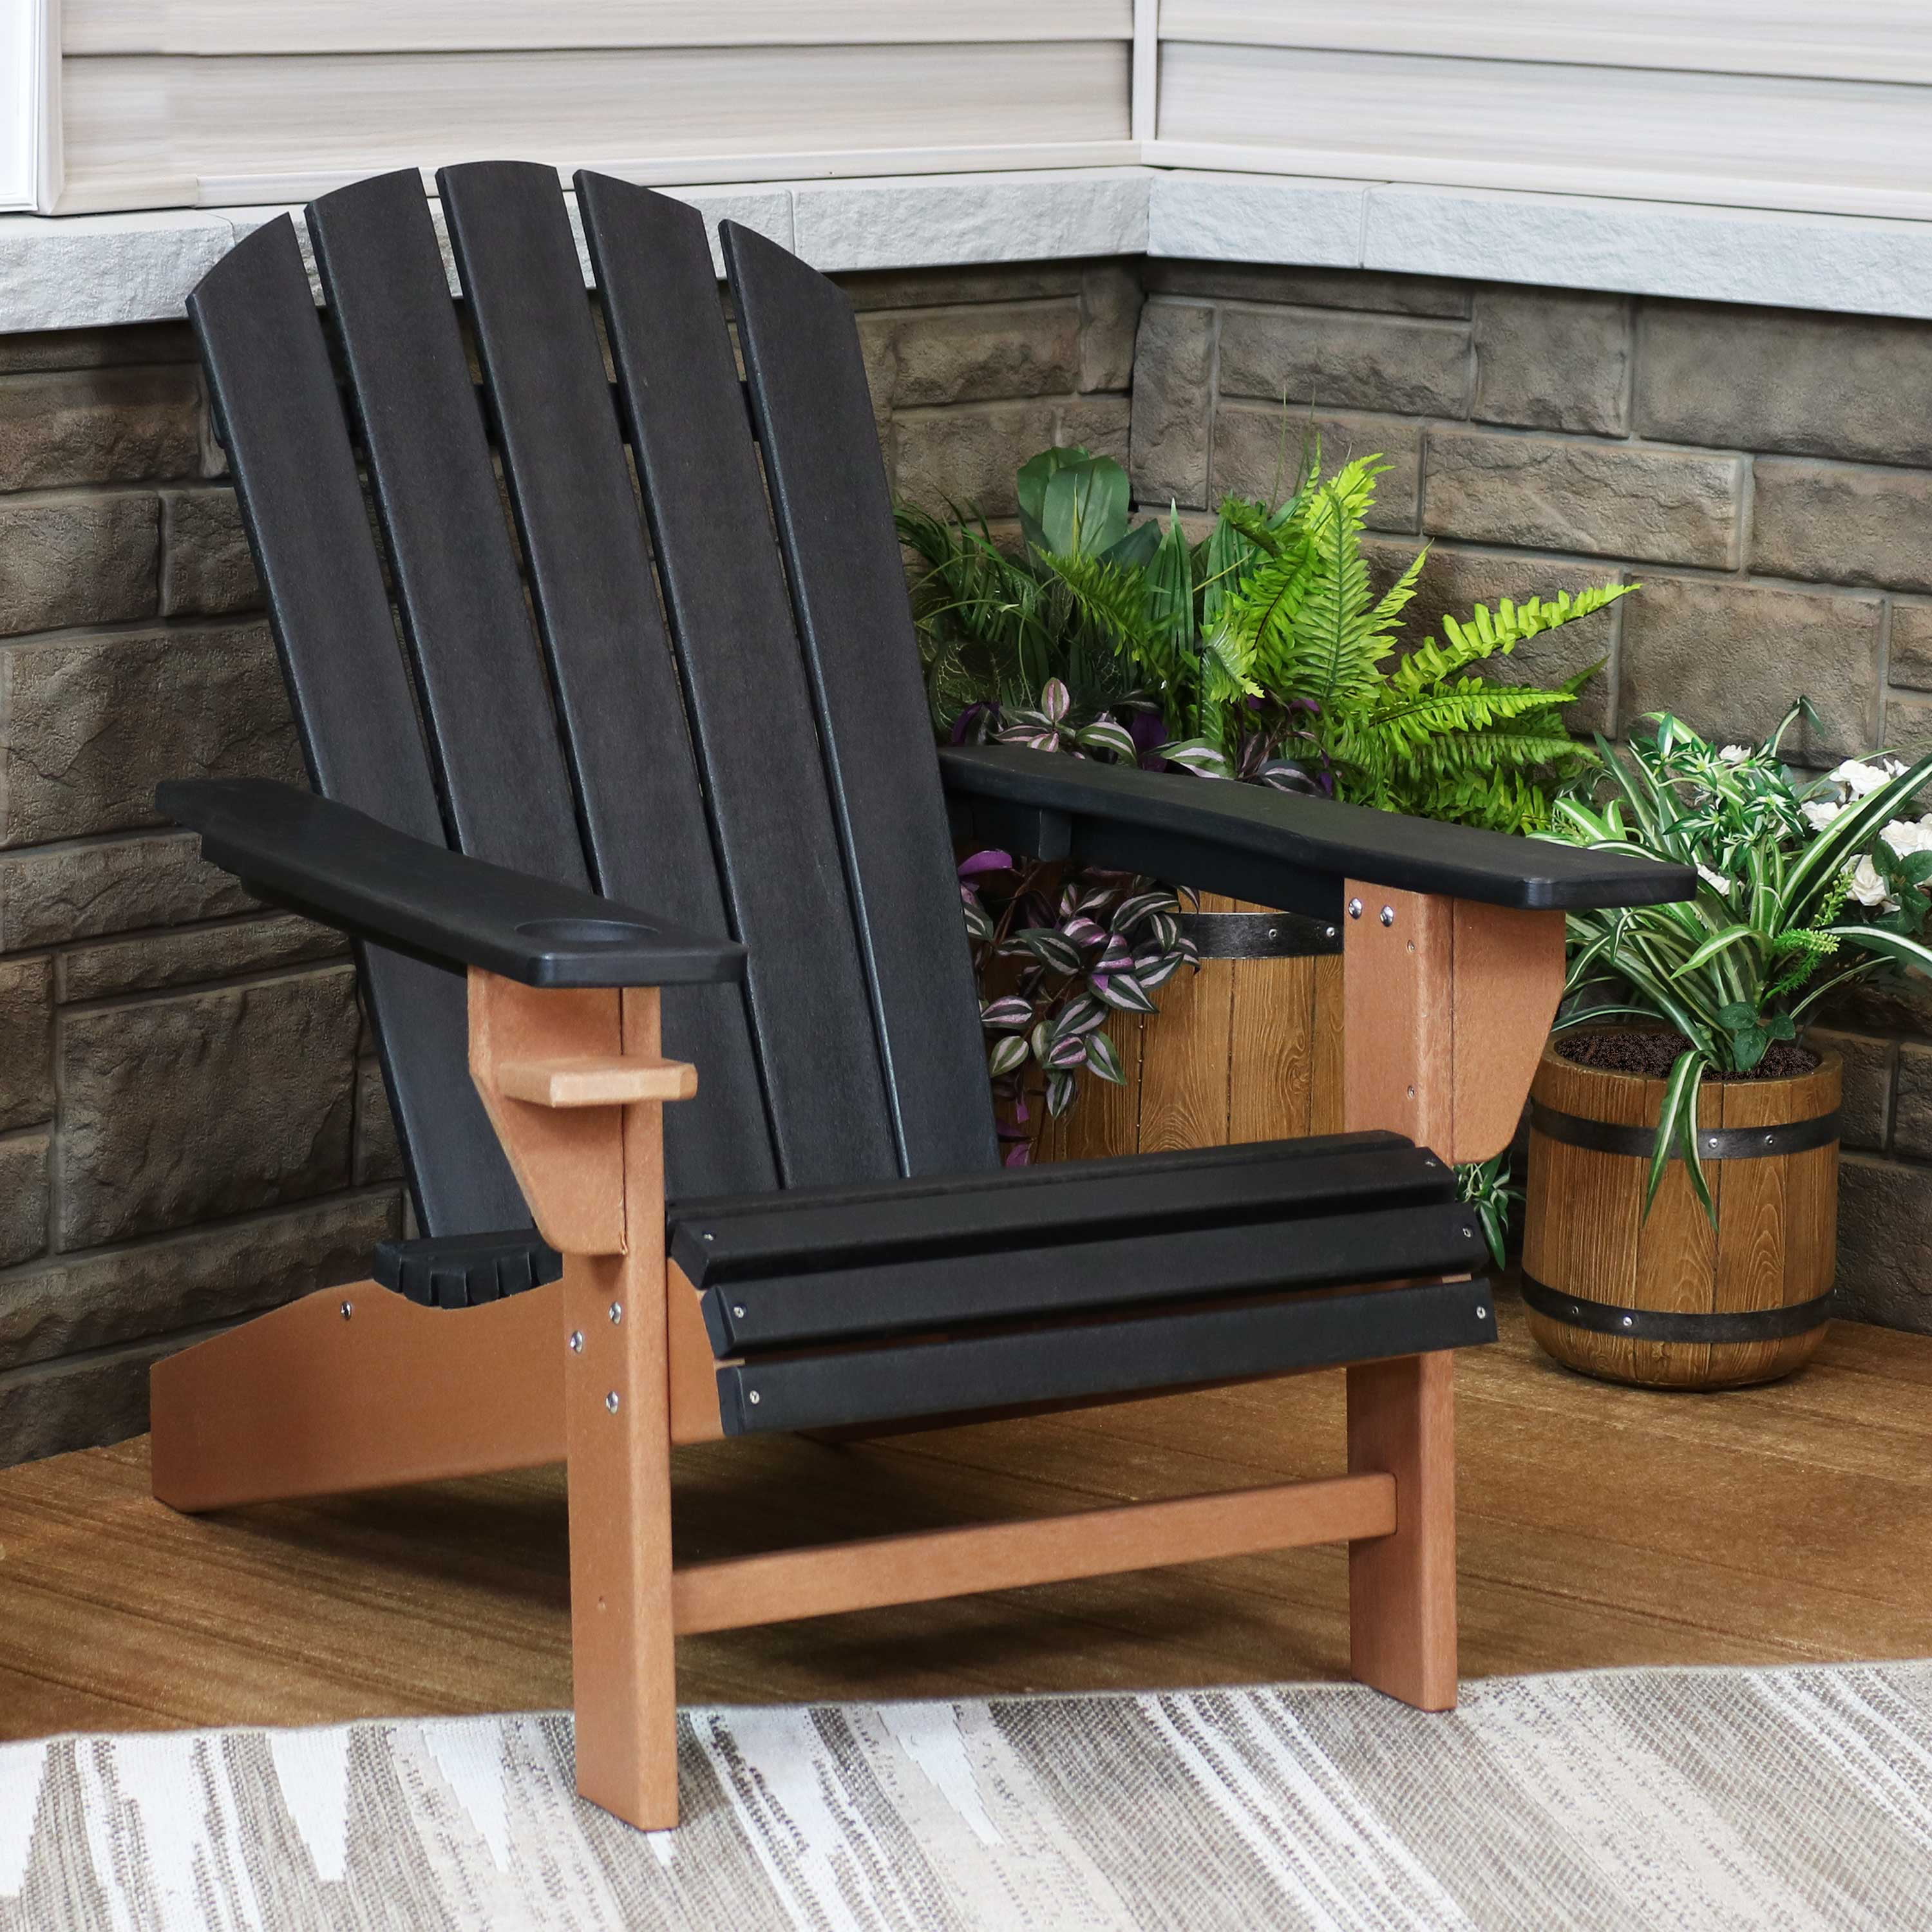 Sunnydaze All Weather Black Brown Outdoor Adirondack Chair With Drink Holder Heavy Duty Hdpe Weatherproof Patio Chair Ideal For Lawn Garden And Around The Firepit Walmart Com Walmart Com